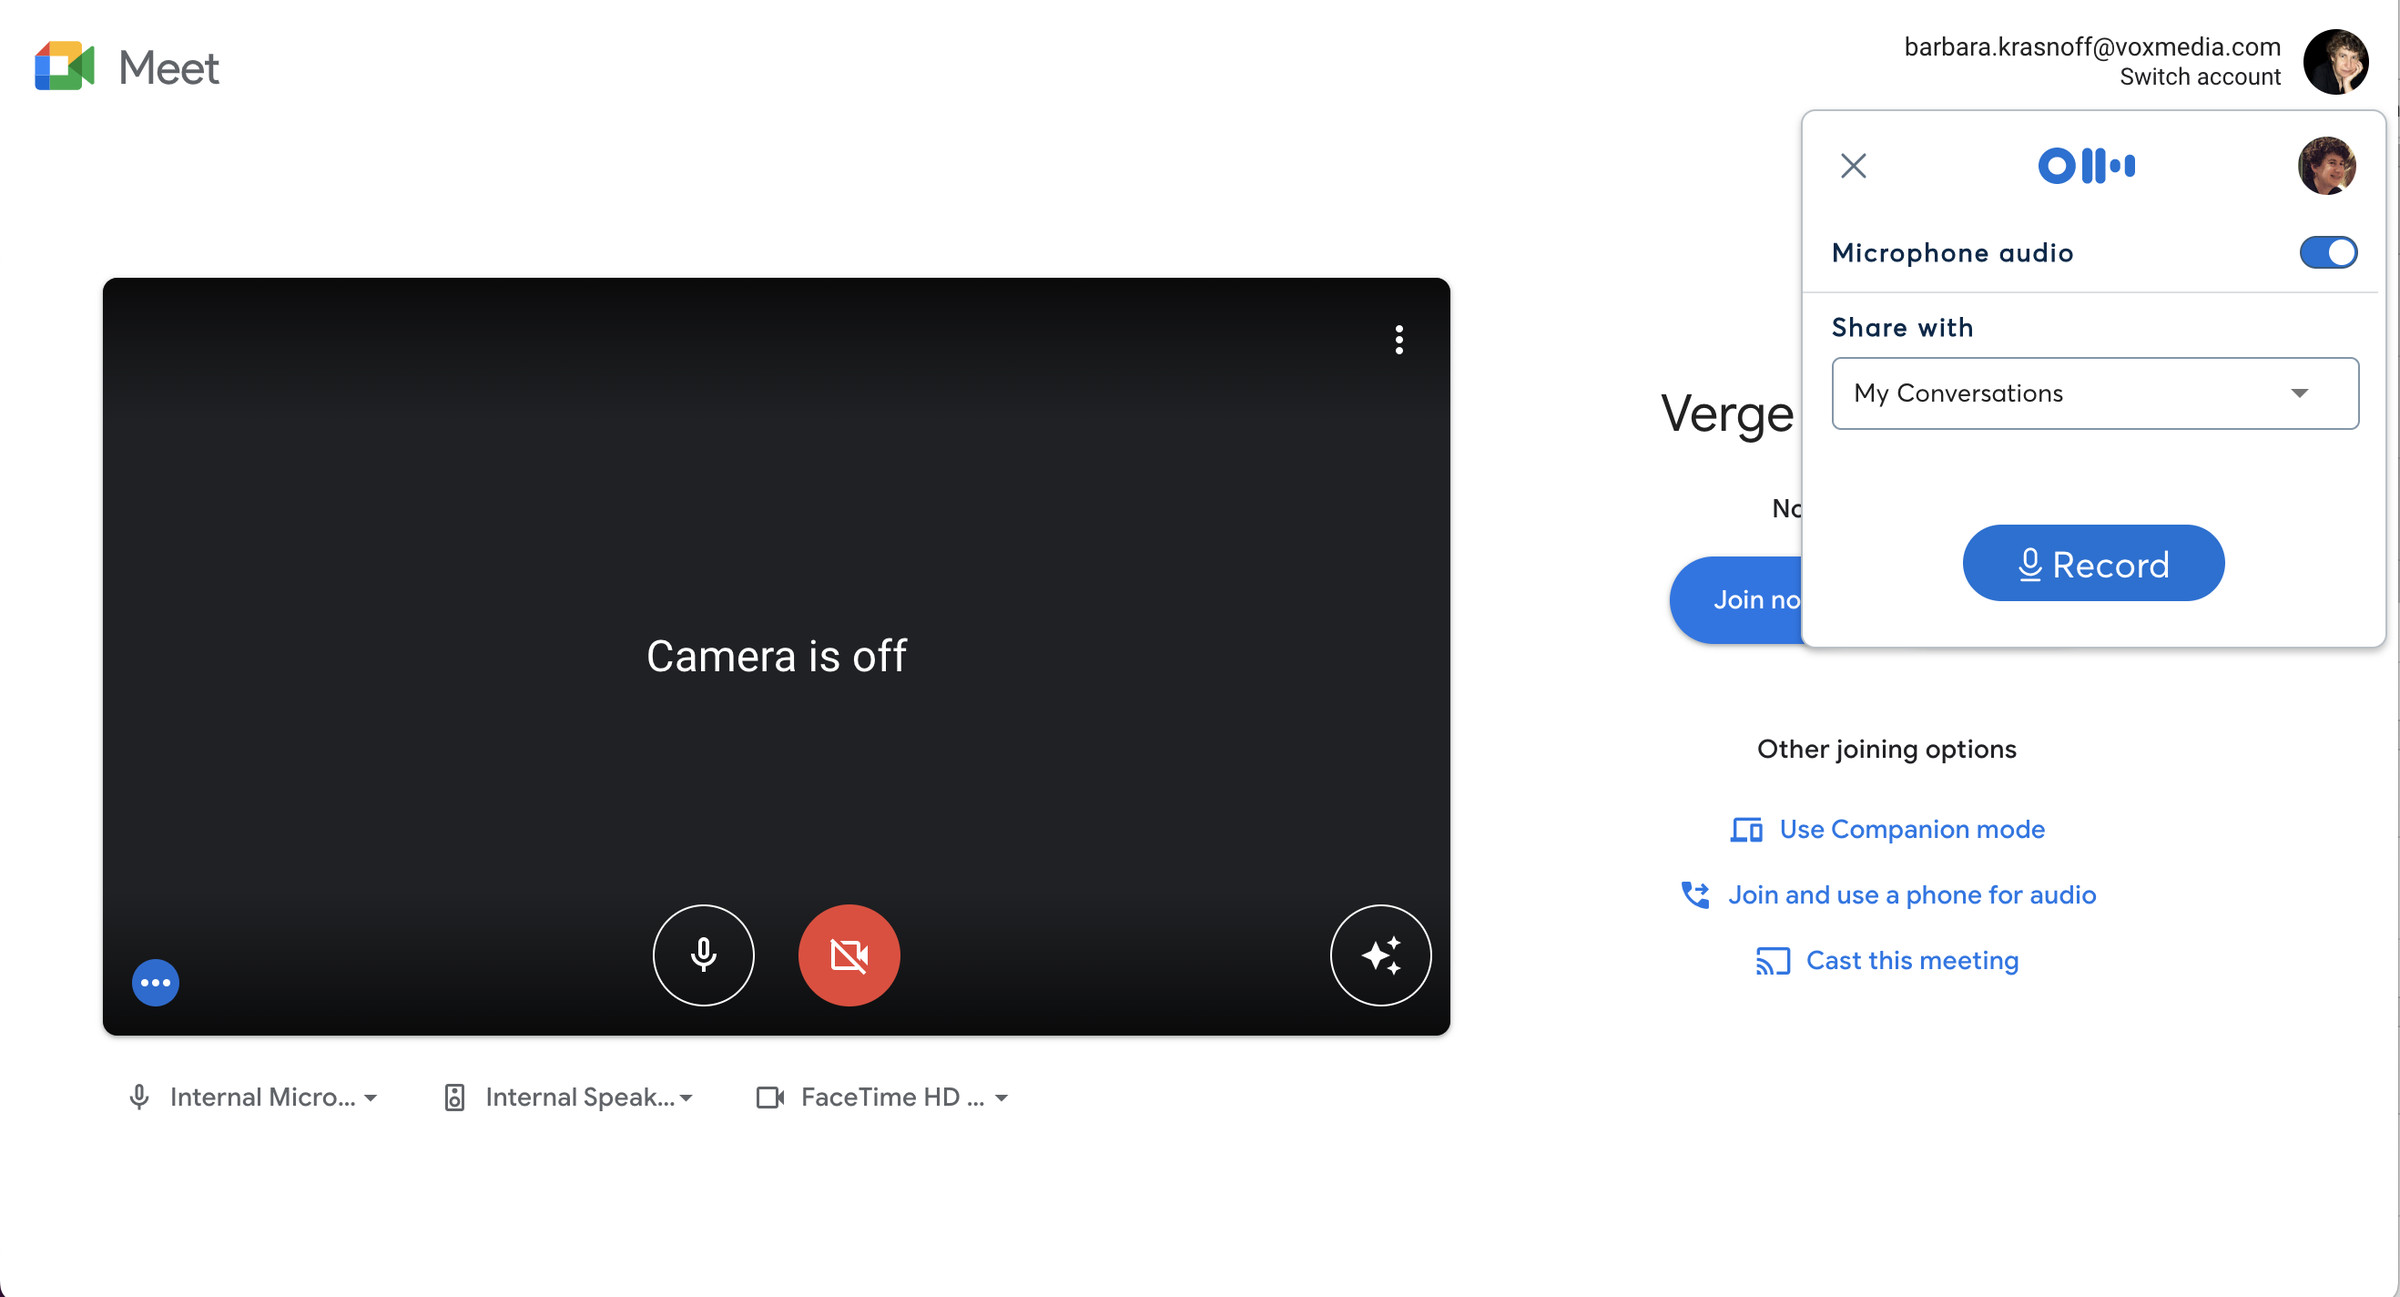 Meet page with a blank video screen labeled “Camera is off” in center, and a pop-up box on the right with a large blue Record button.